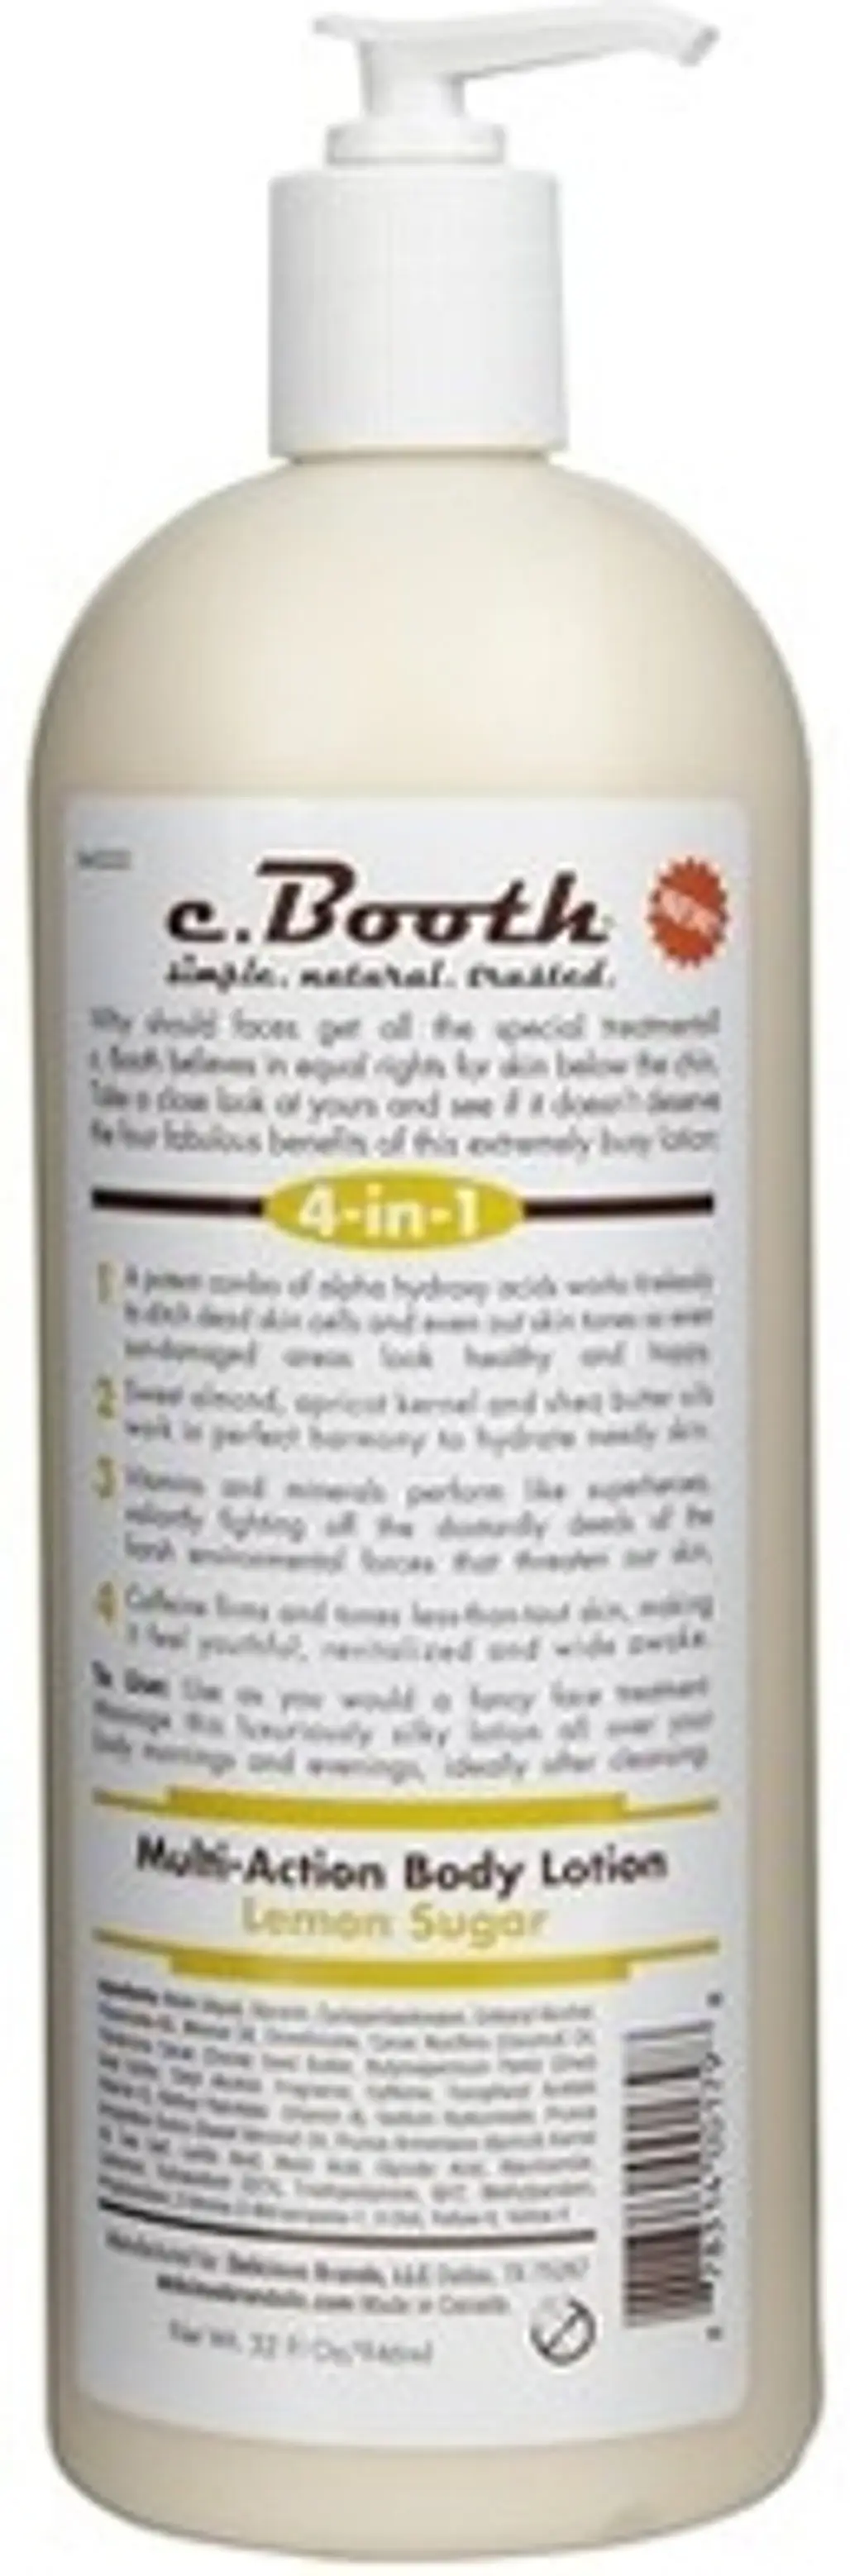 C. Booth 4-in-1 Multi Action Body Lotion, Lemon Sugar